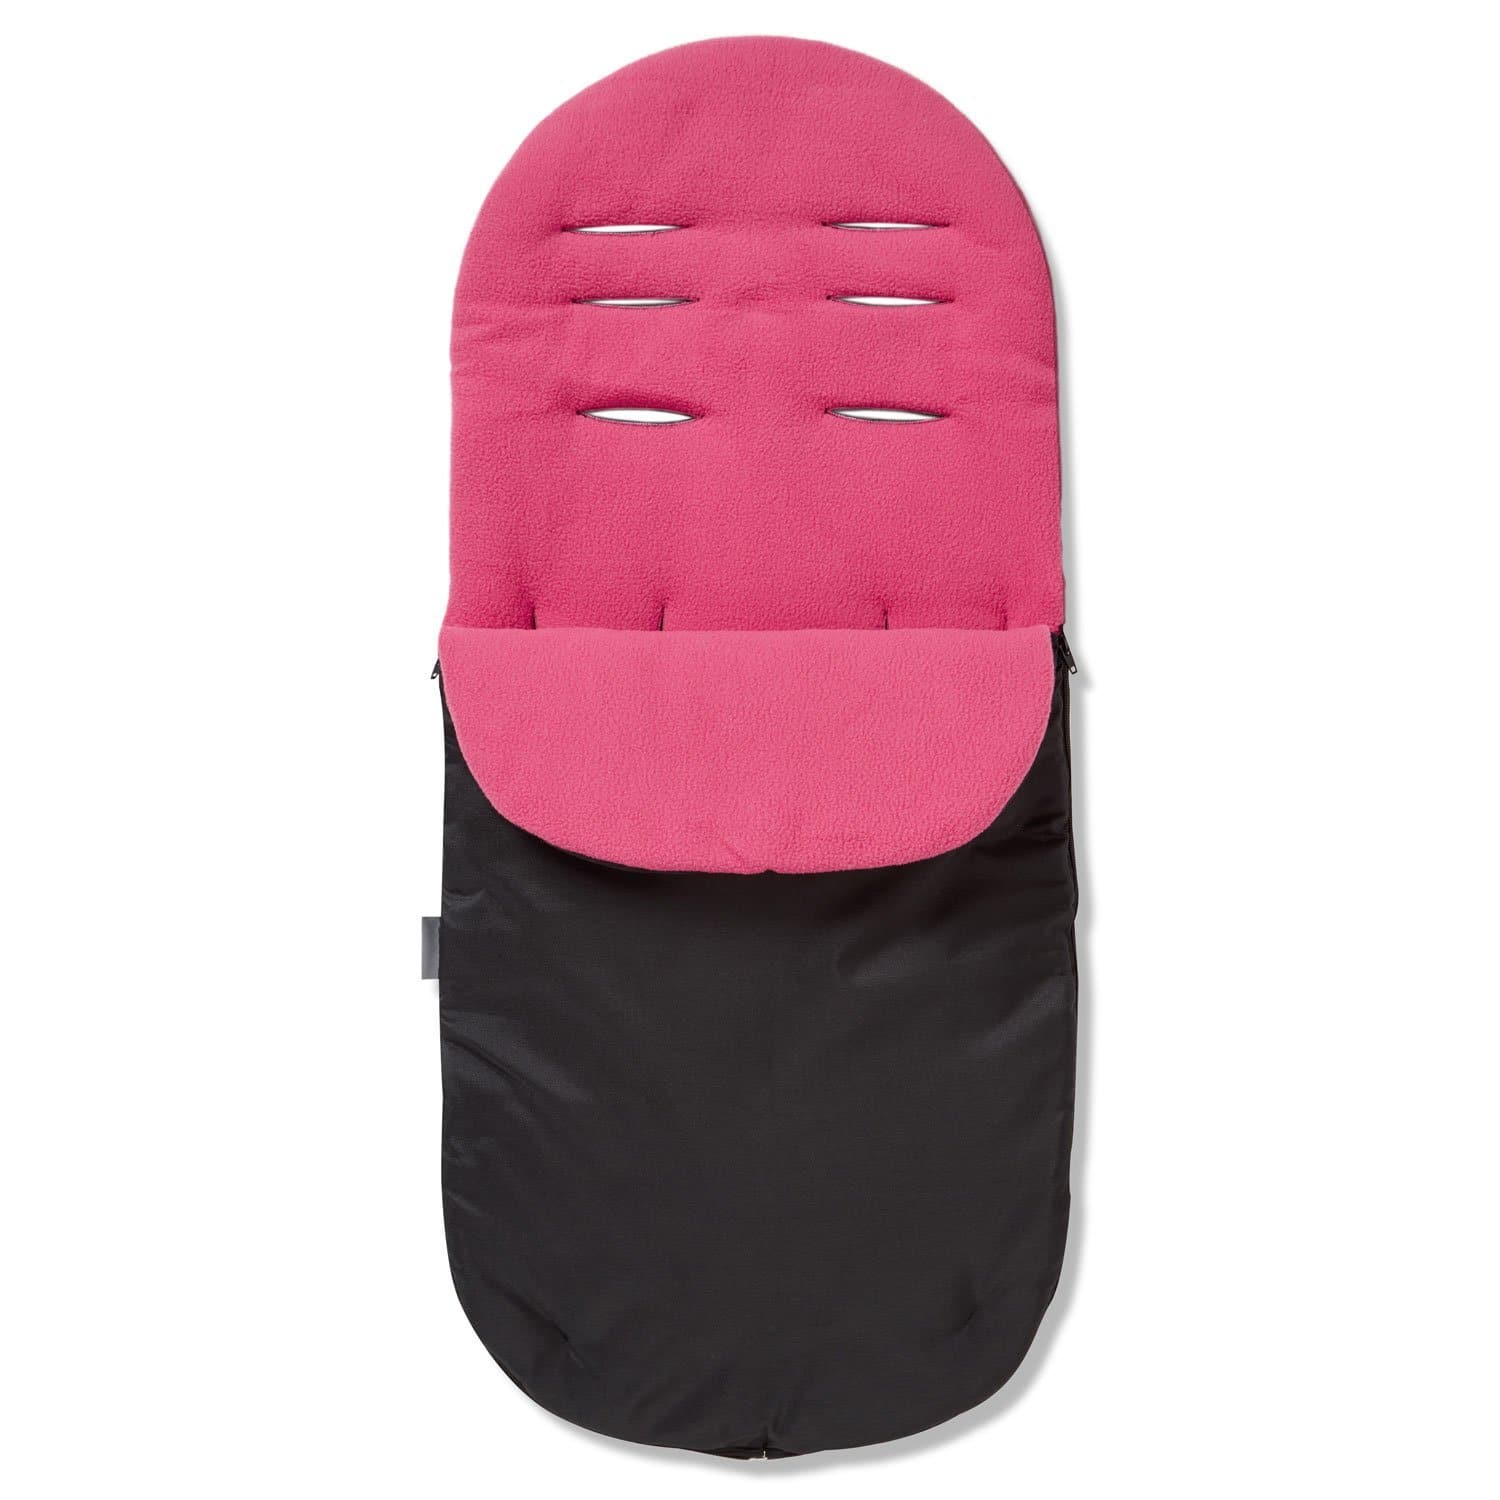 Footmuff / Cosy Toes Compatible with Baby Weavers - For Your Little One